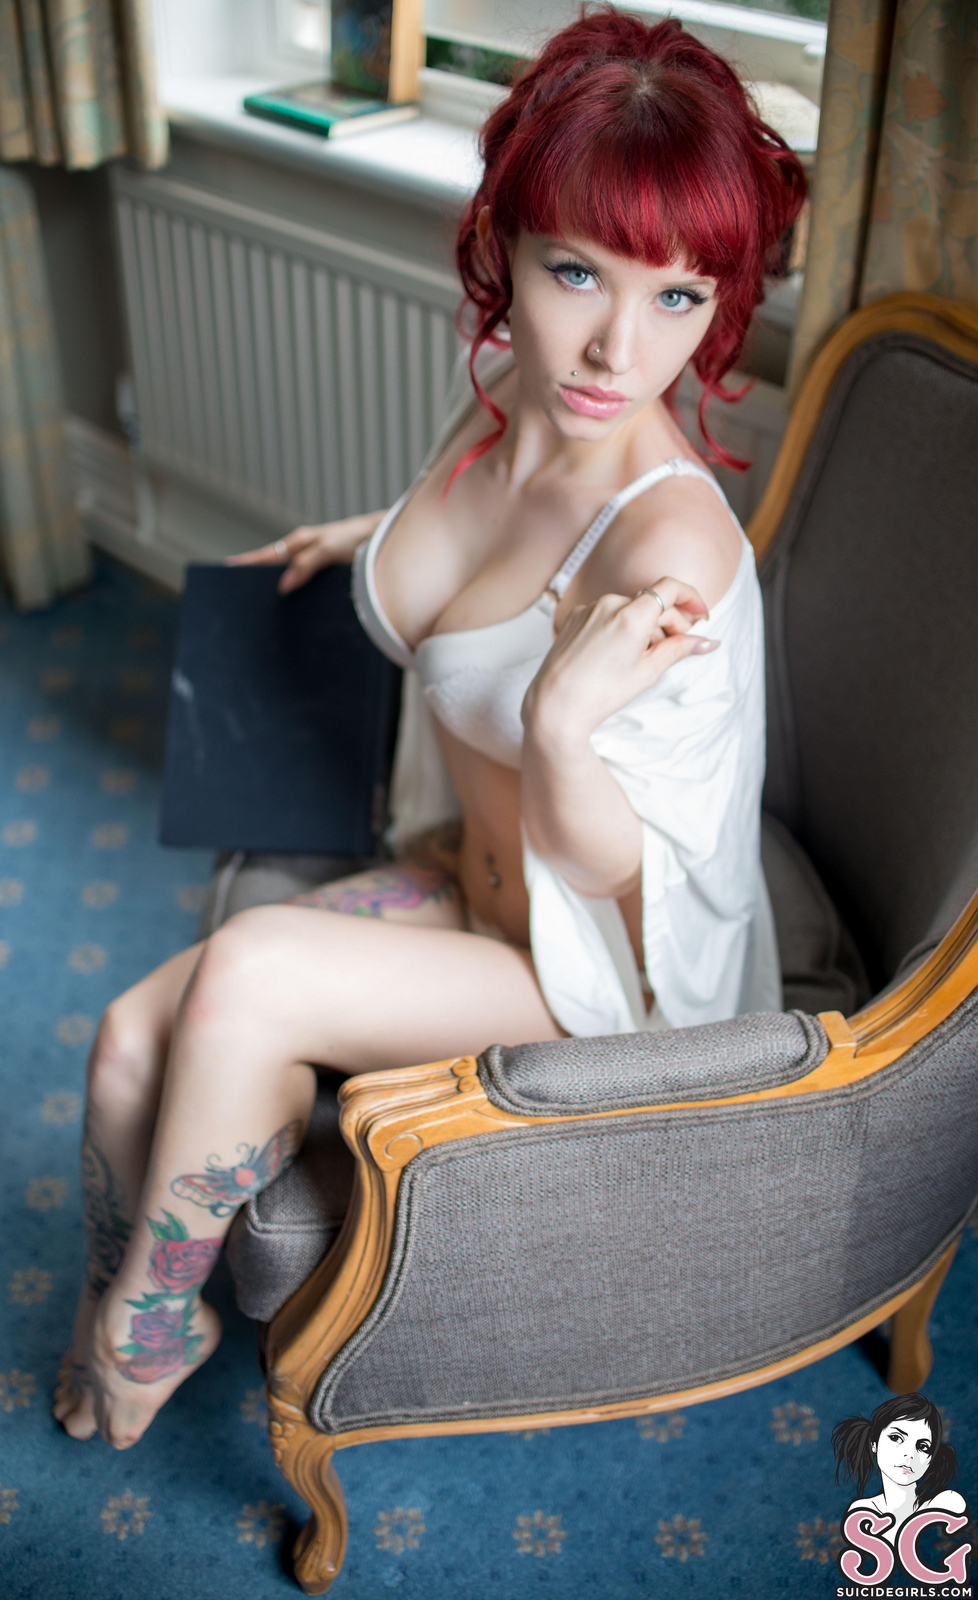 rouge-naked-redhead-tattoos-white-lingerie-suicide-girls-02